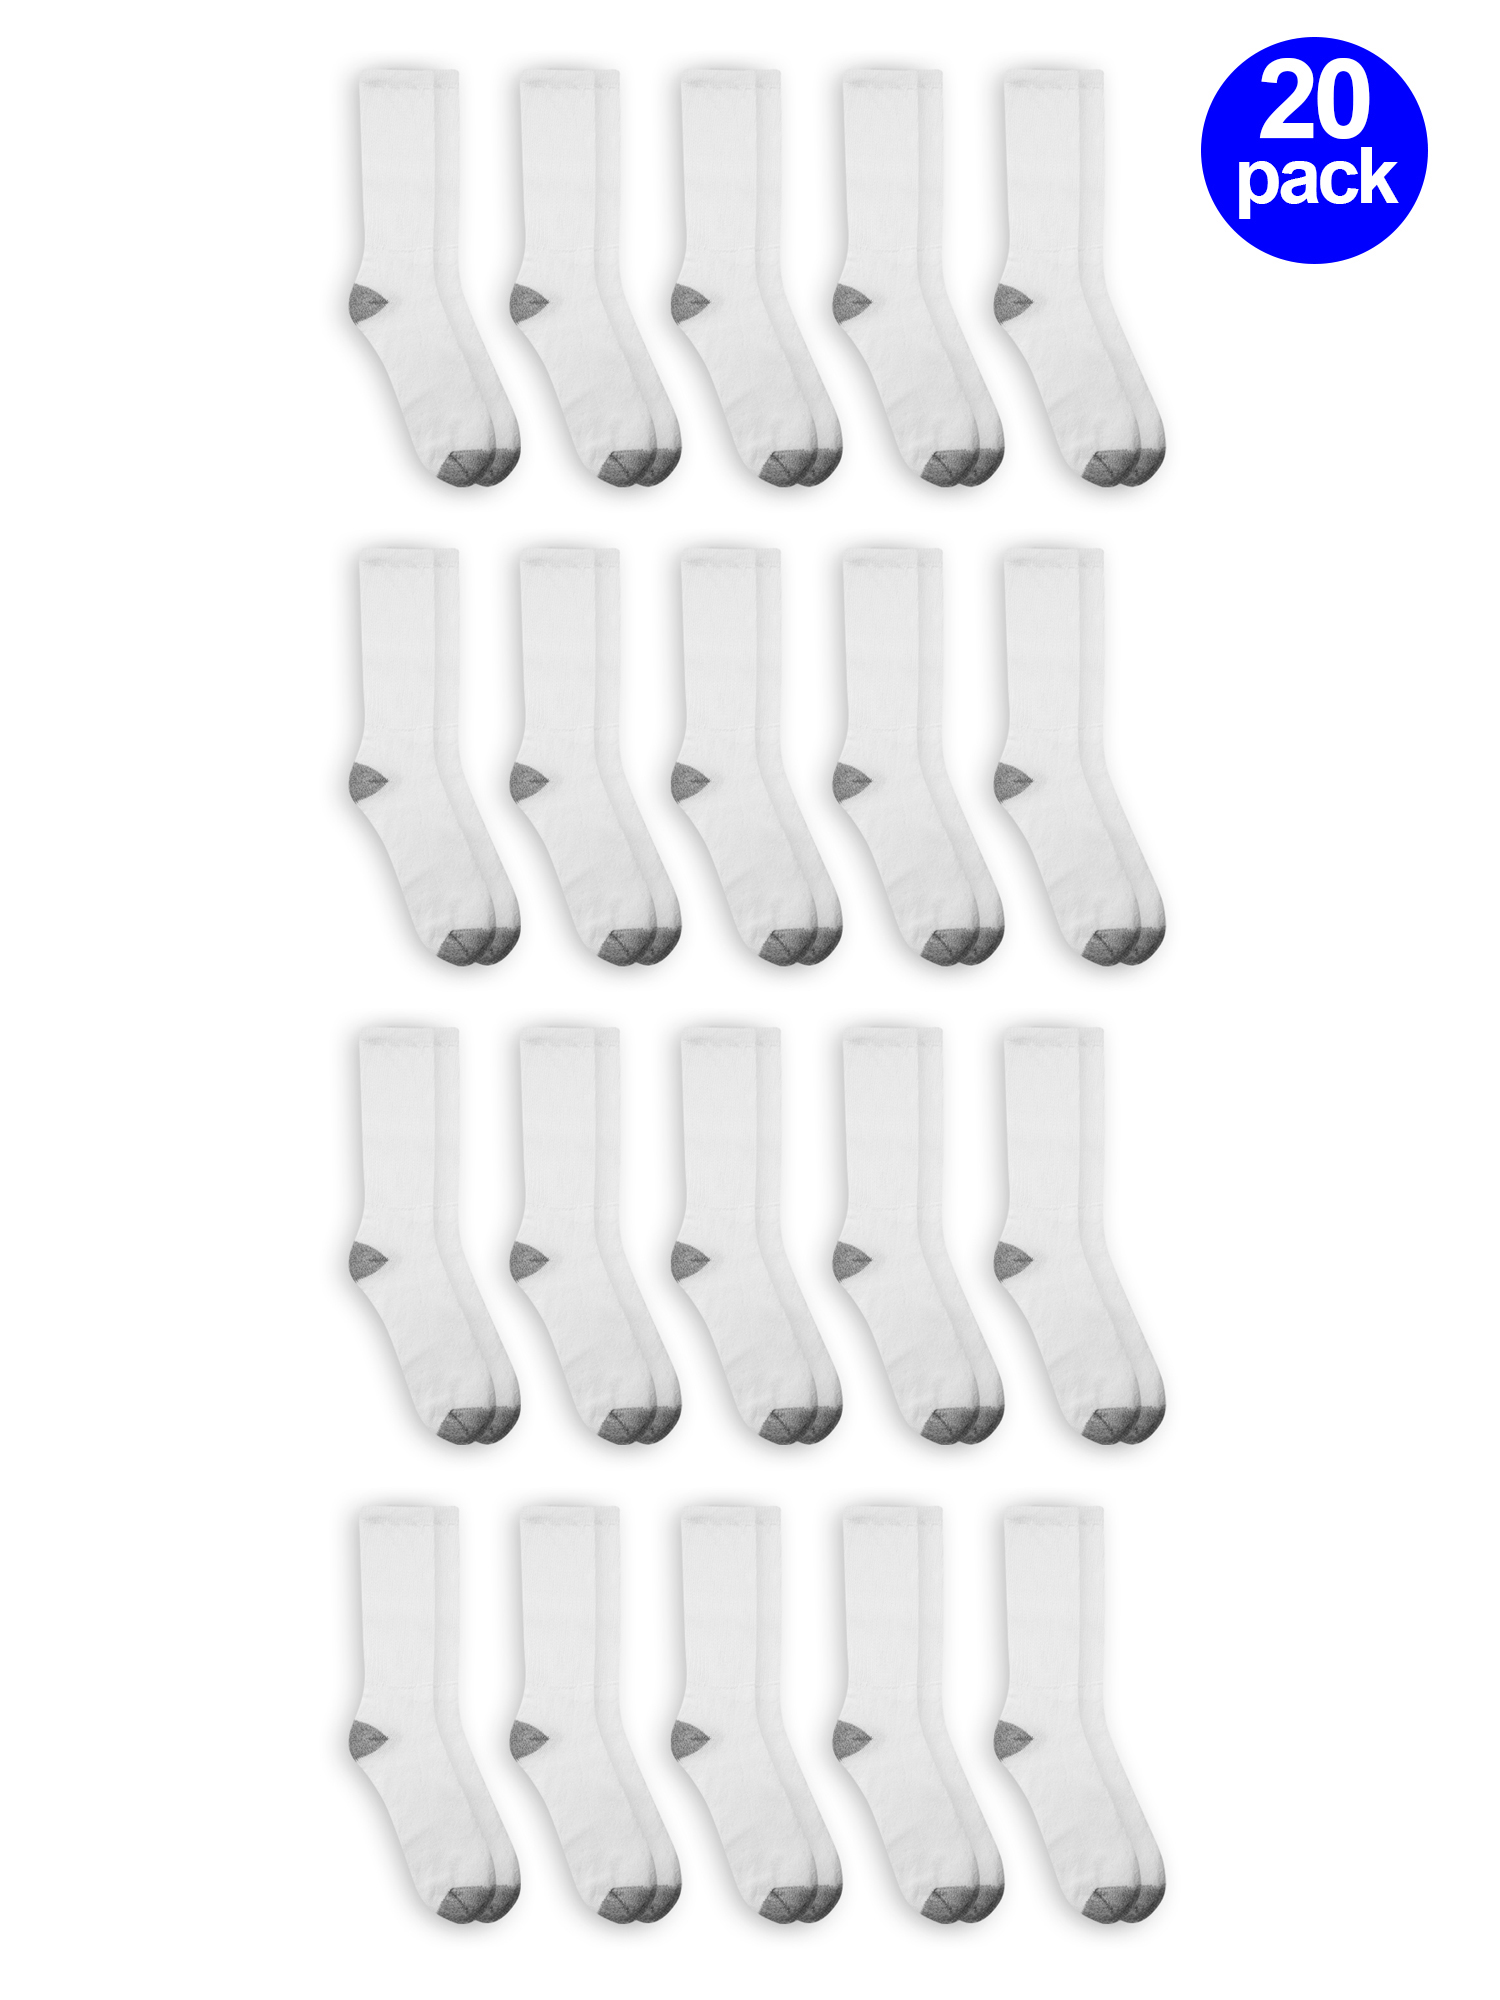 Athletic Works Men's Crew Socks Extra Value 20 Pack - image 1 of 2